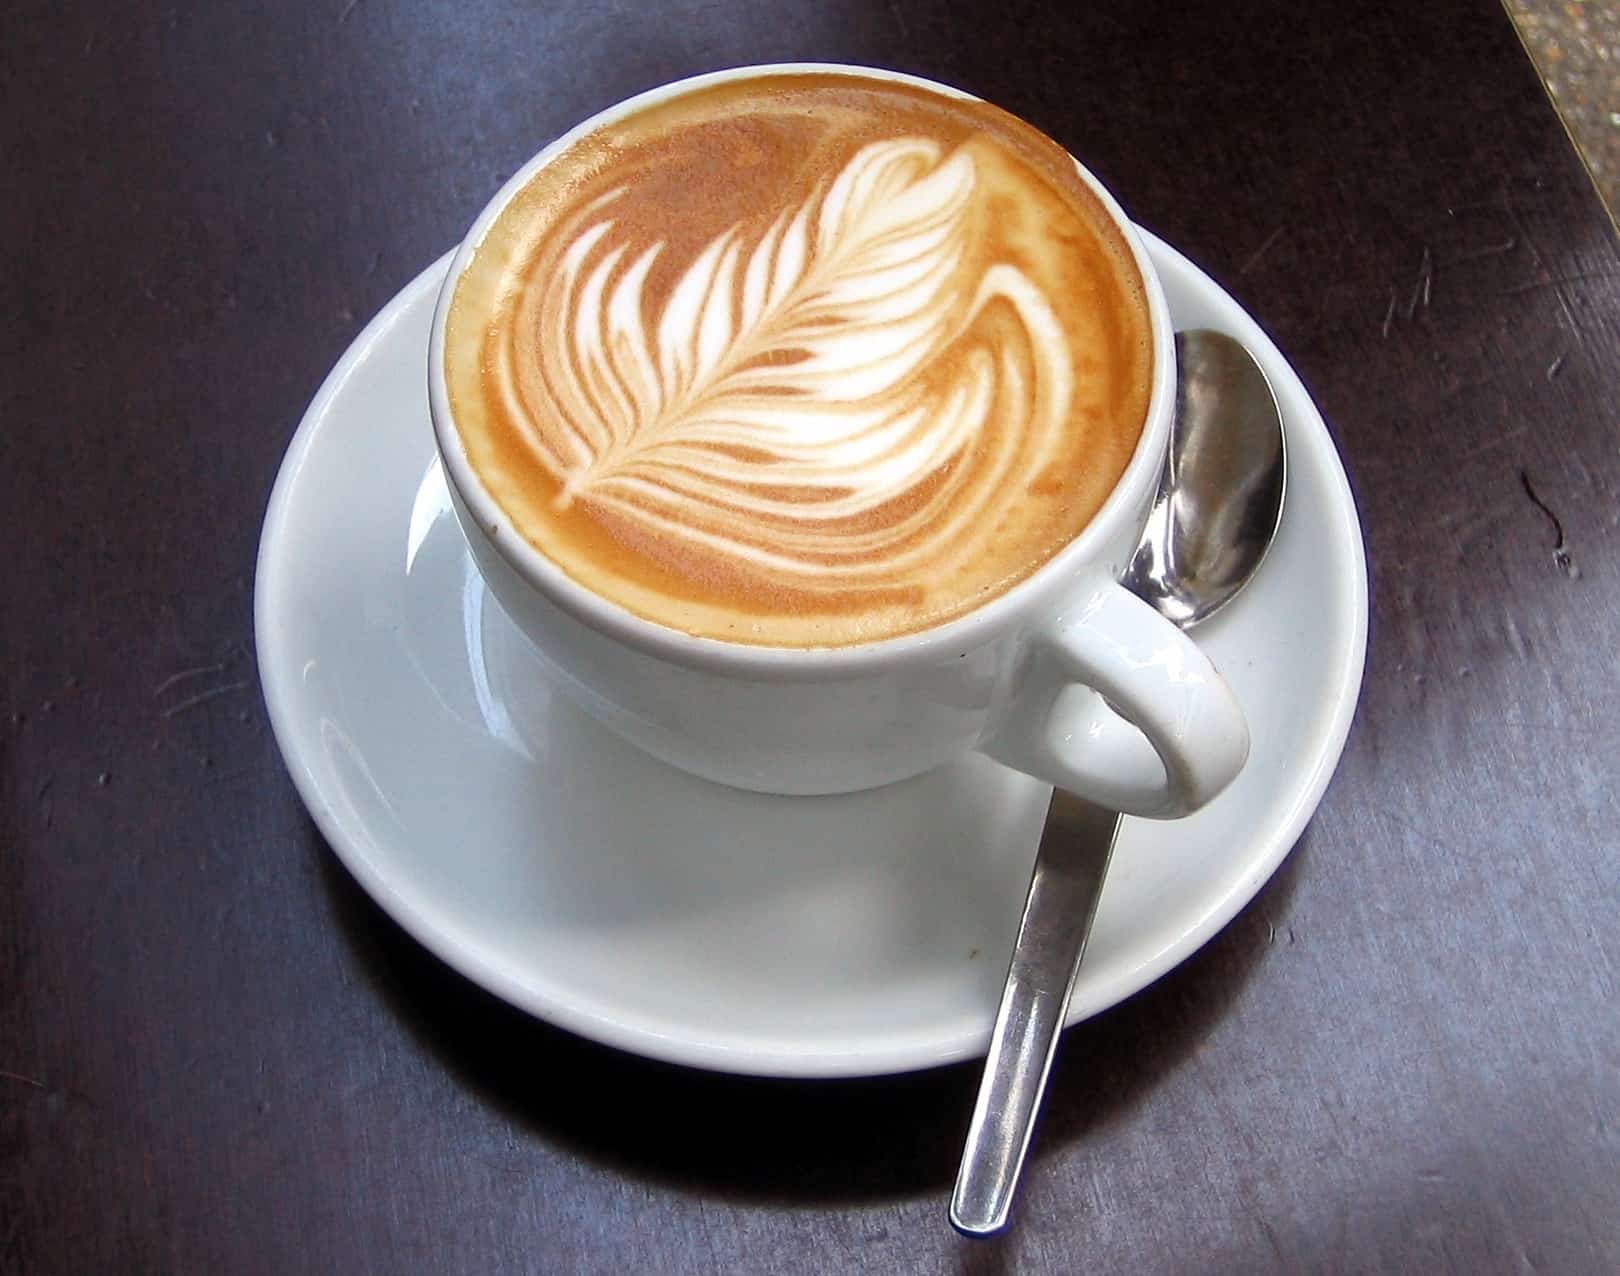 A cup of coffee with a leaf design on top, featuring a flat white or latte.